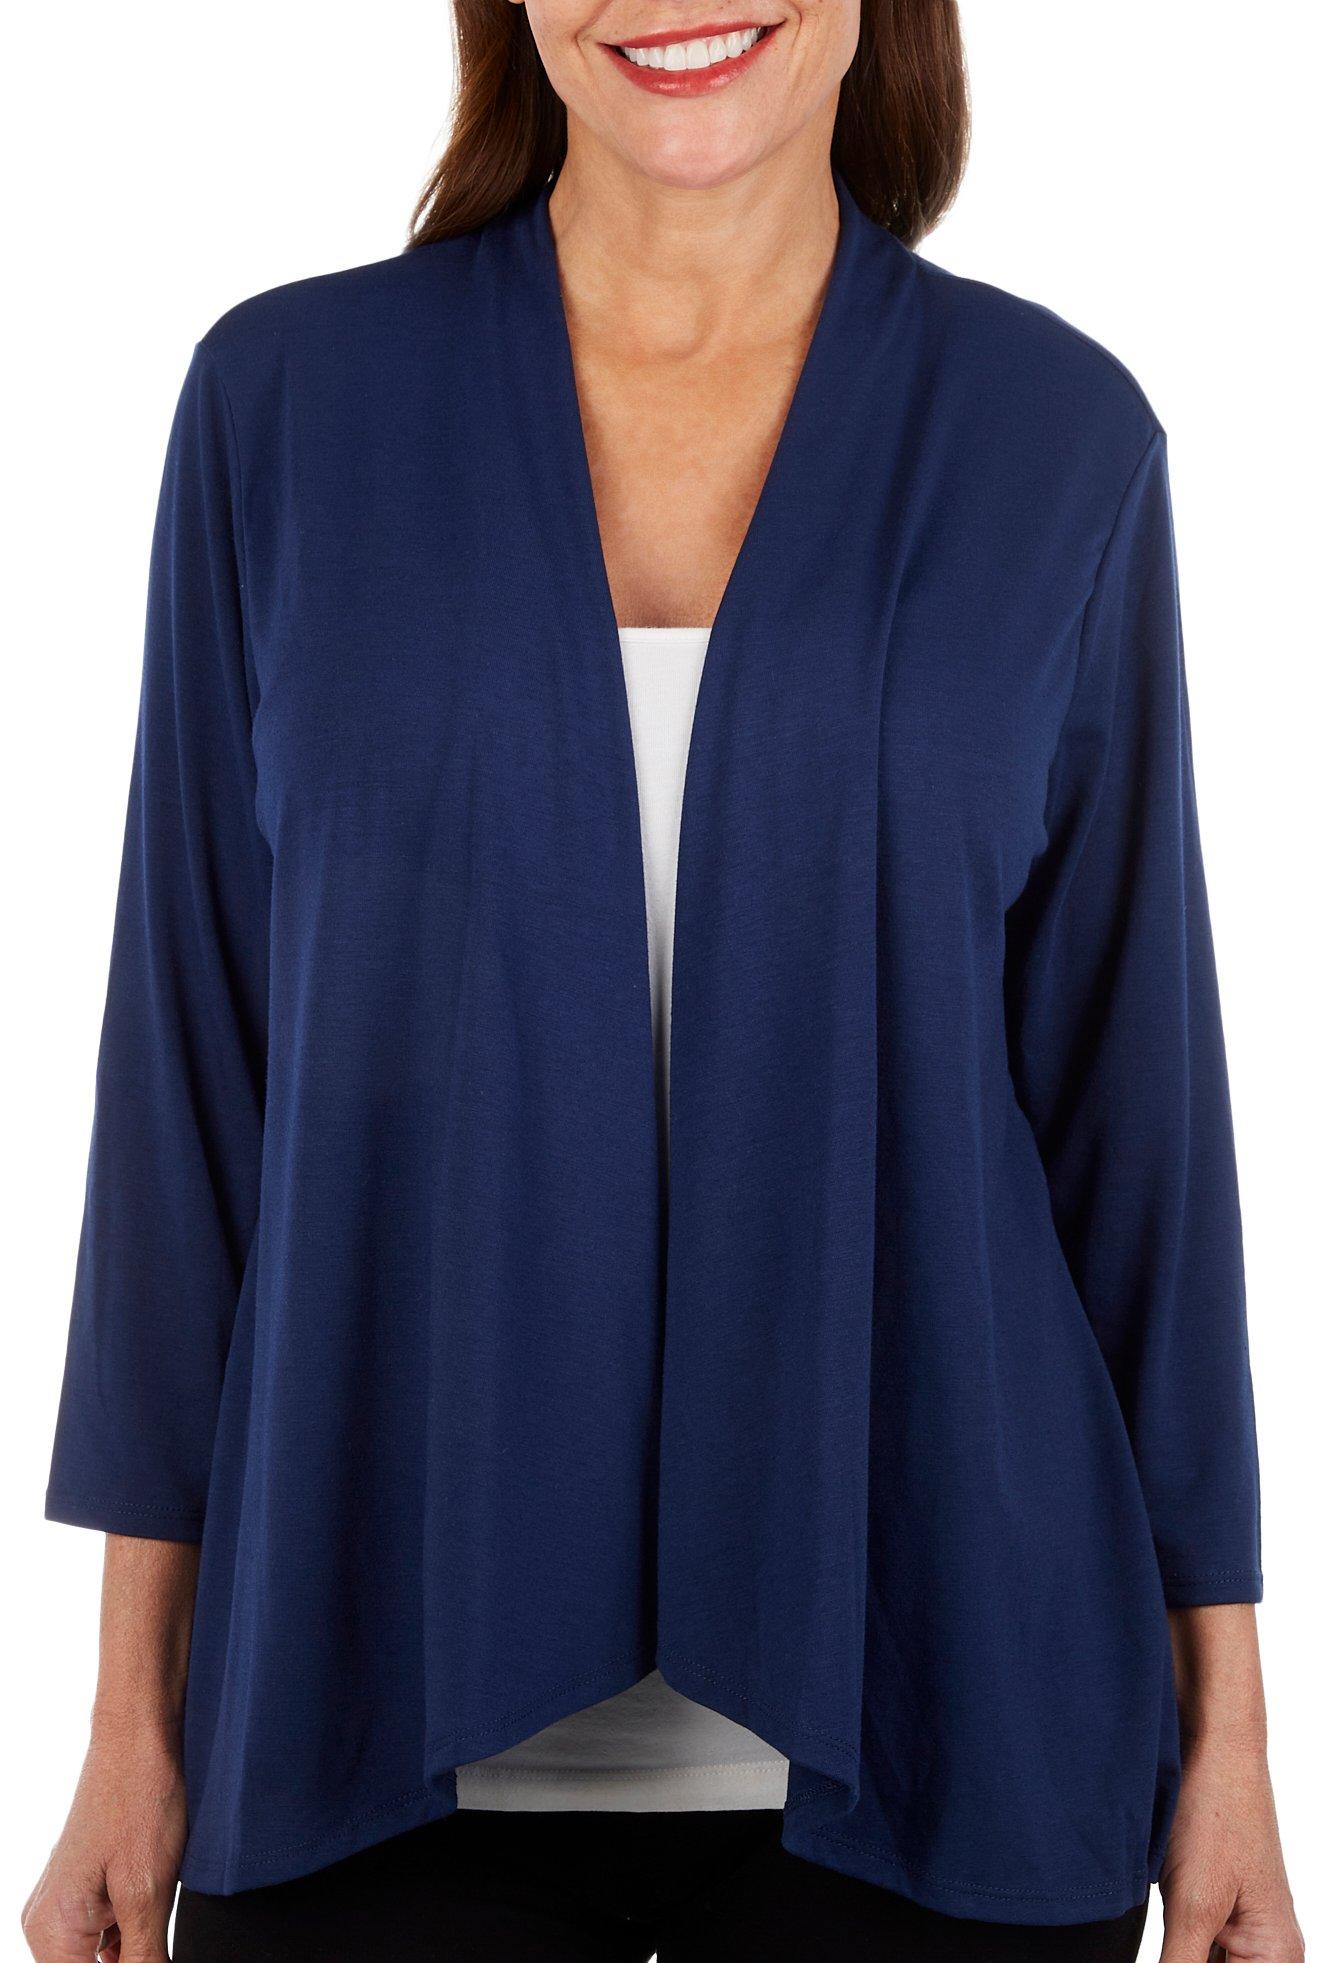 Notations Womens Solid Open Cardigan